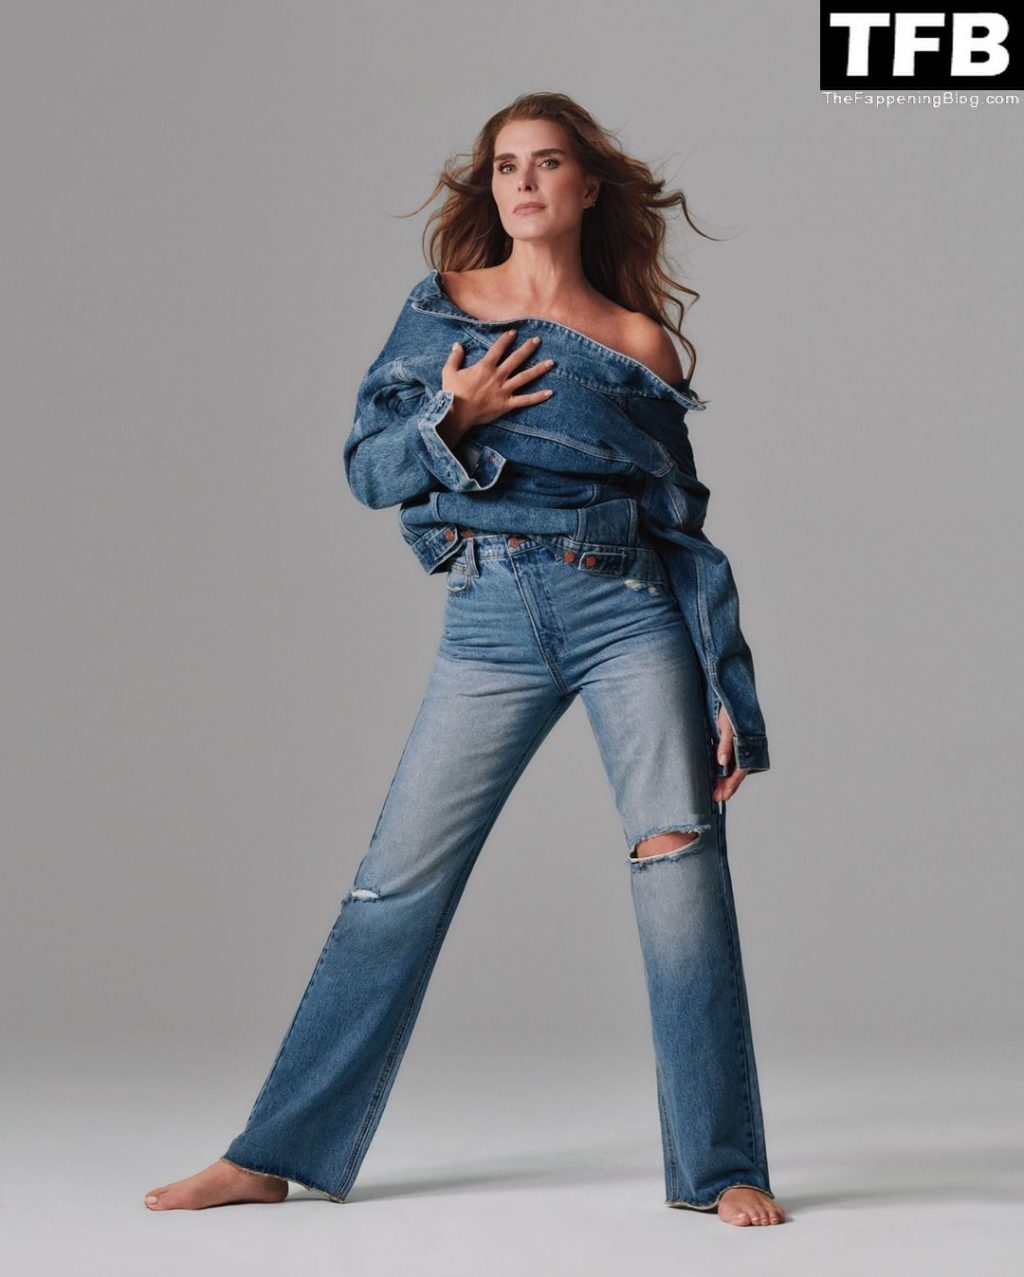 Brooke Shields Goes Topless For Jordache Jeans (6 Photos)